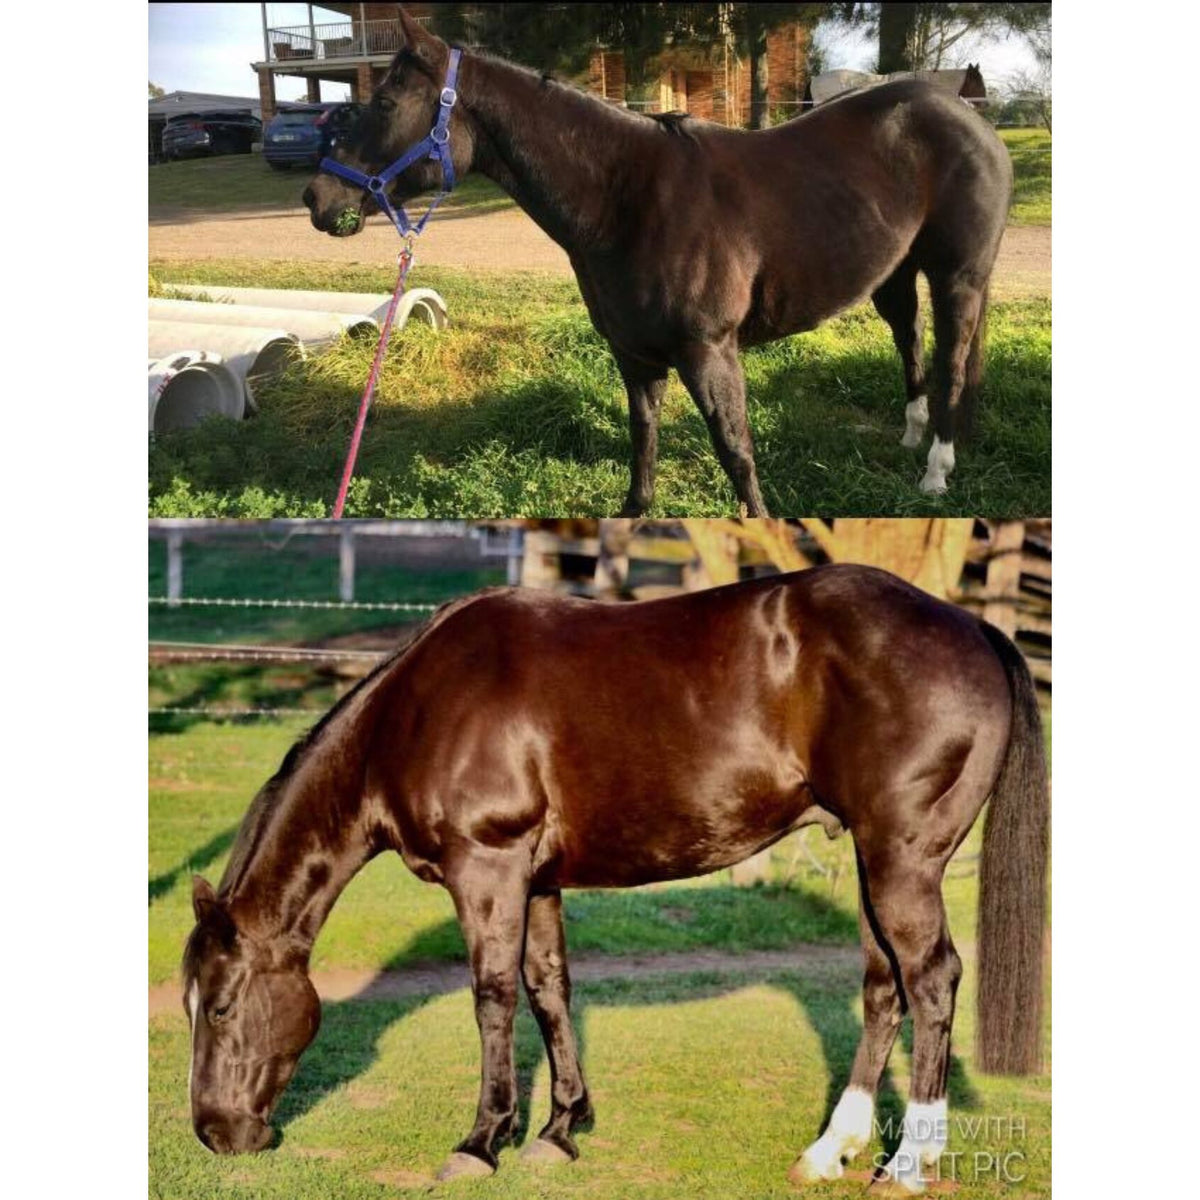 Horse before and after using Digestive EQ, looking shinier after.